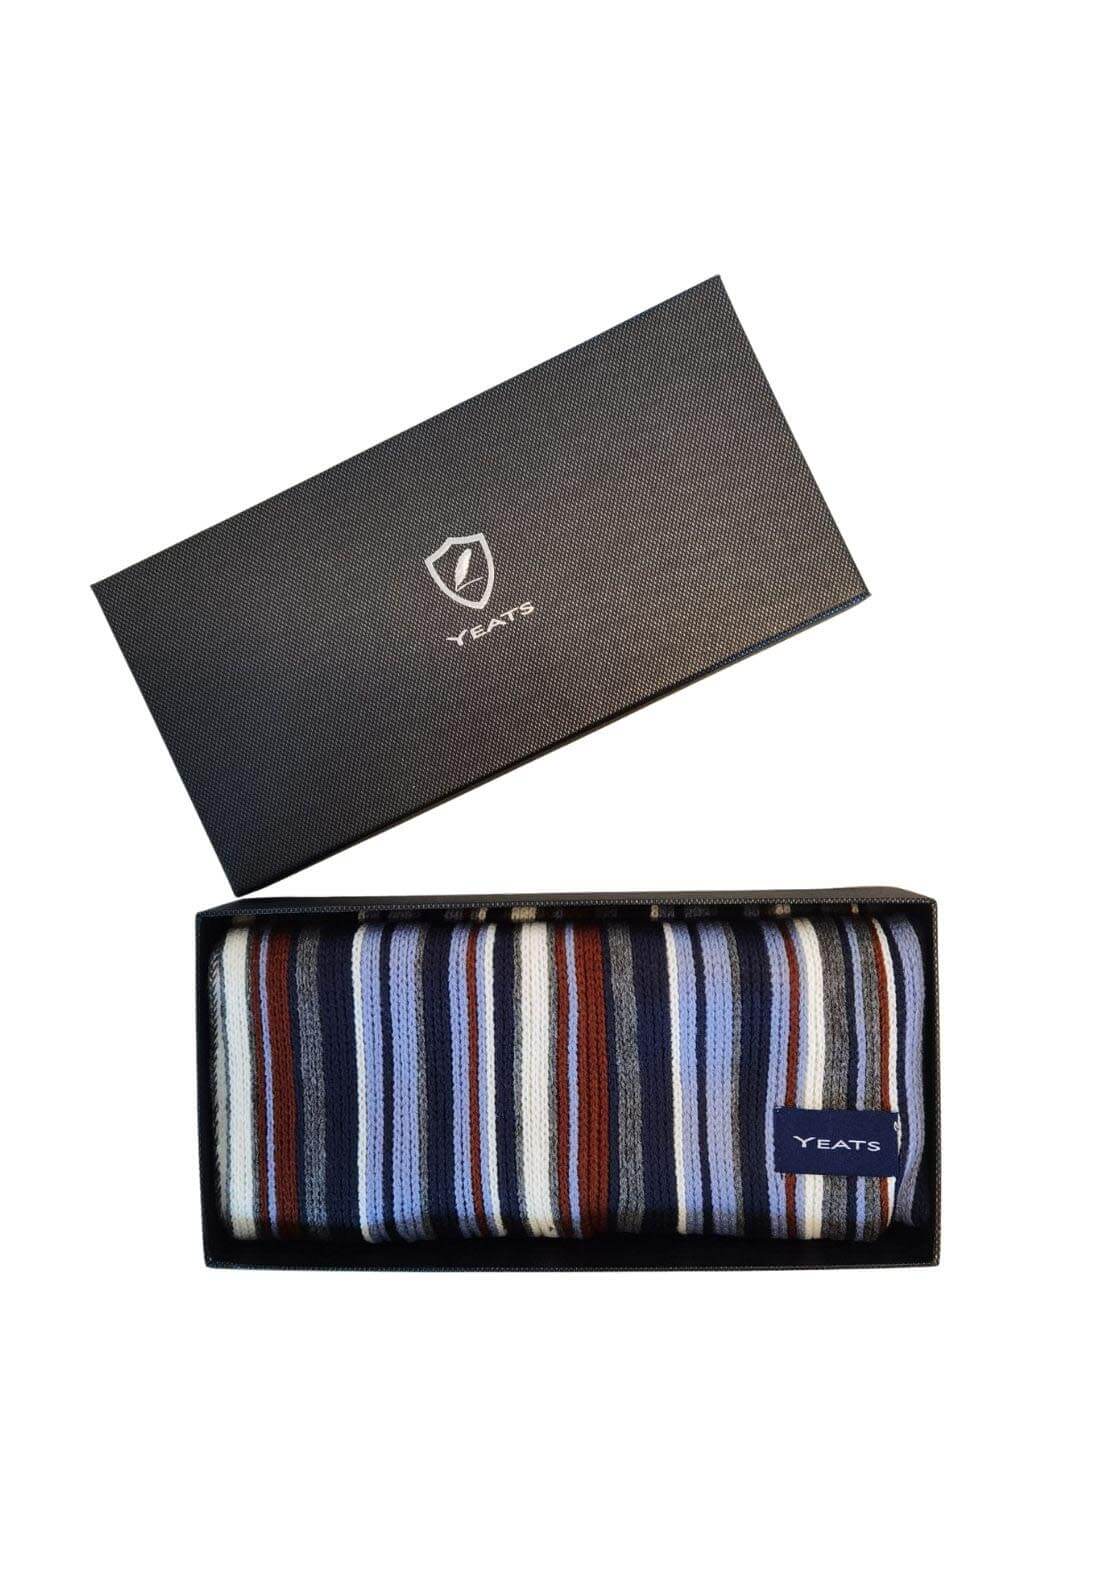 Yeats Boxed Raschel Scarves - Multi 1 Shaws Department Stores